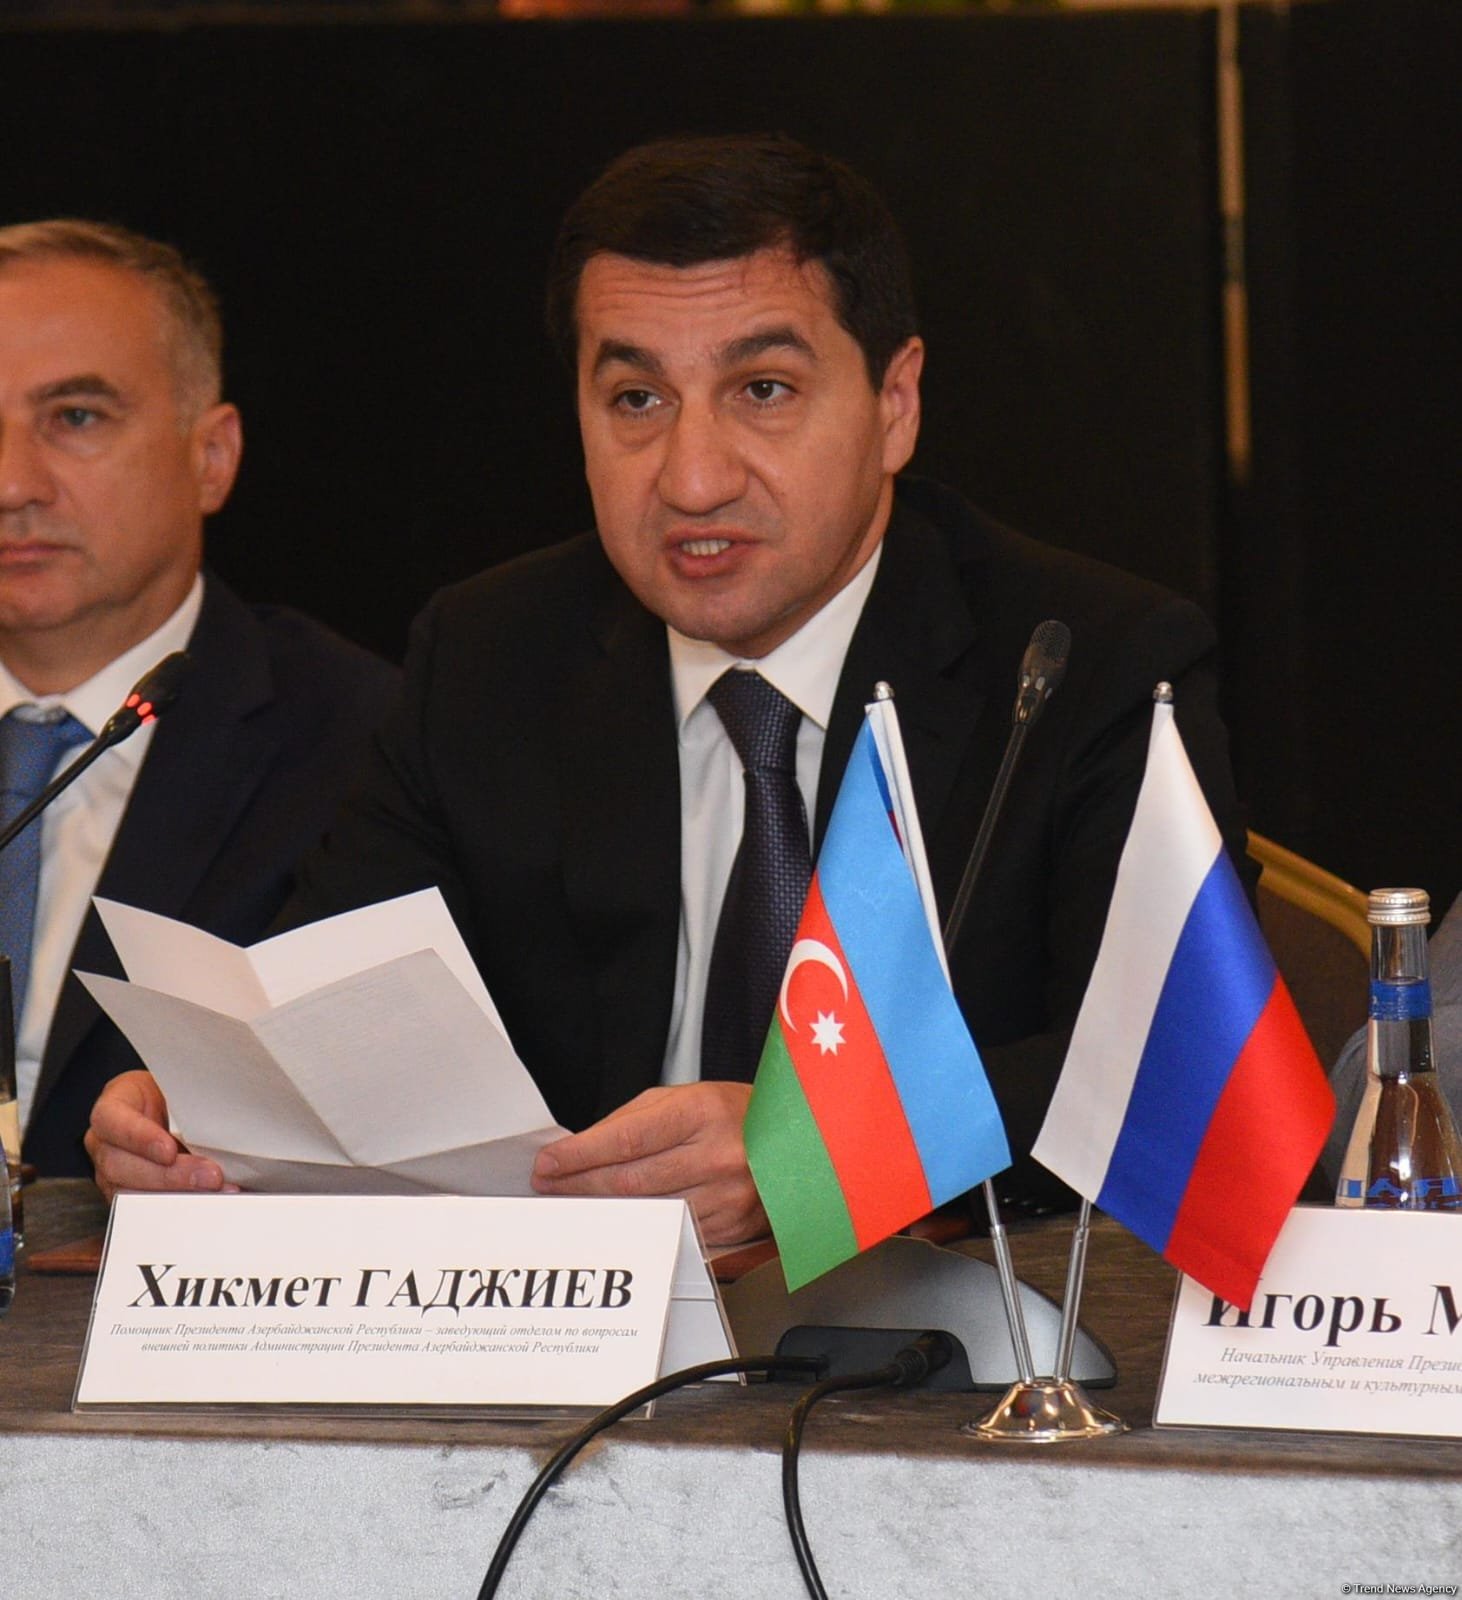 Top-level relations exist between Azerbaijan and Russia - Assistant to President